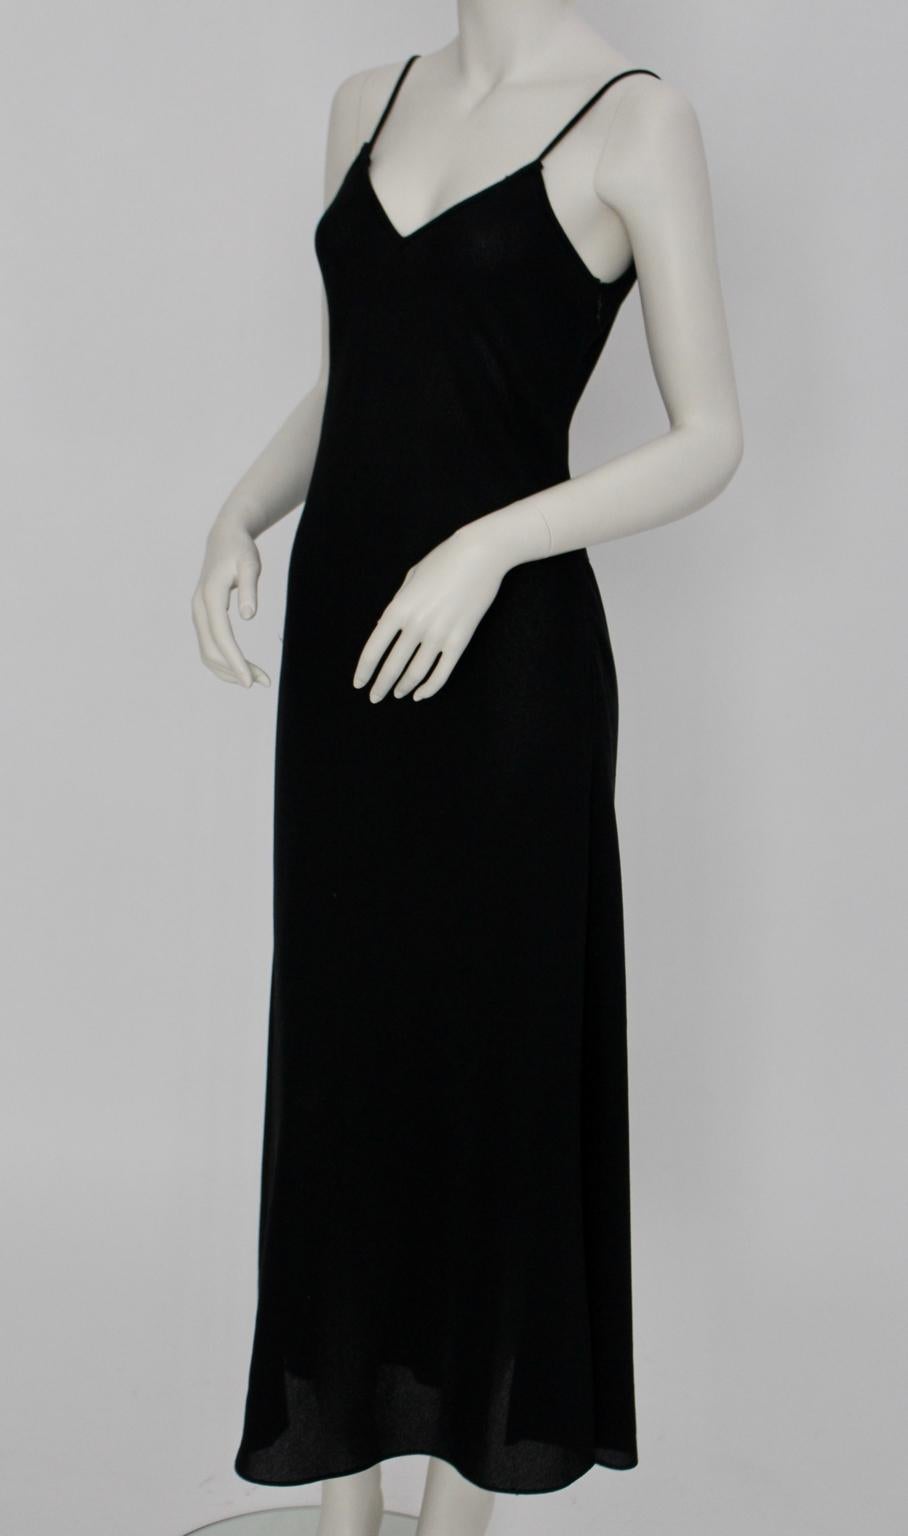 Sonia Rykiel Vintage Black Spaghetti Strap Dress  In Good Condition For Sale In Vienna, AT